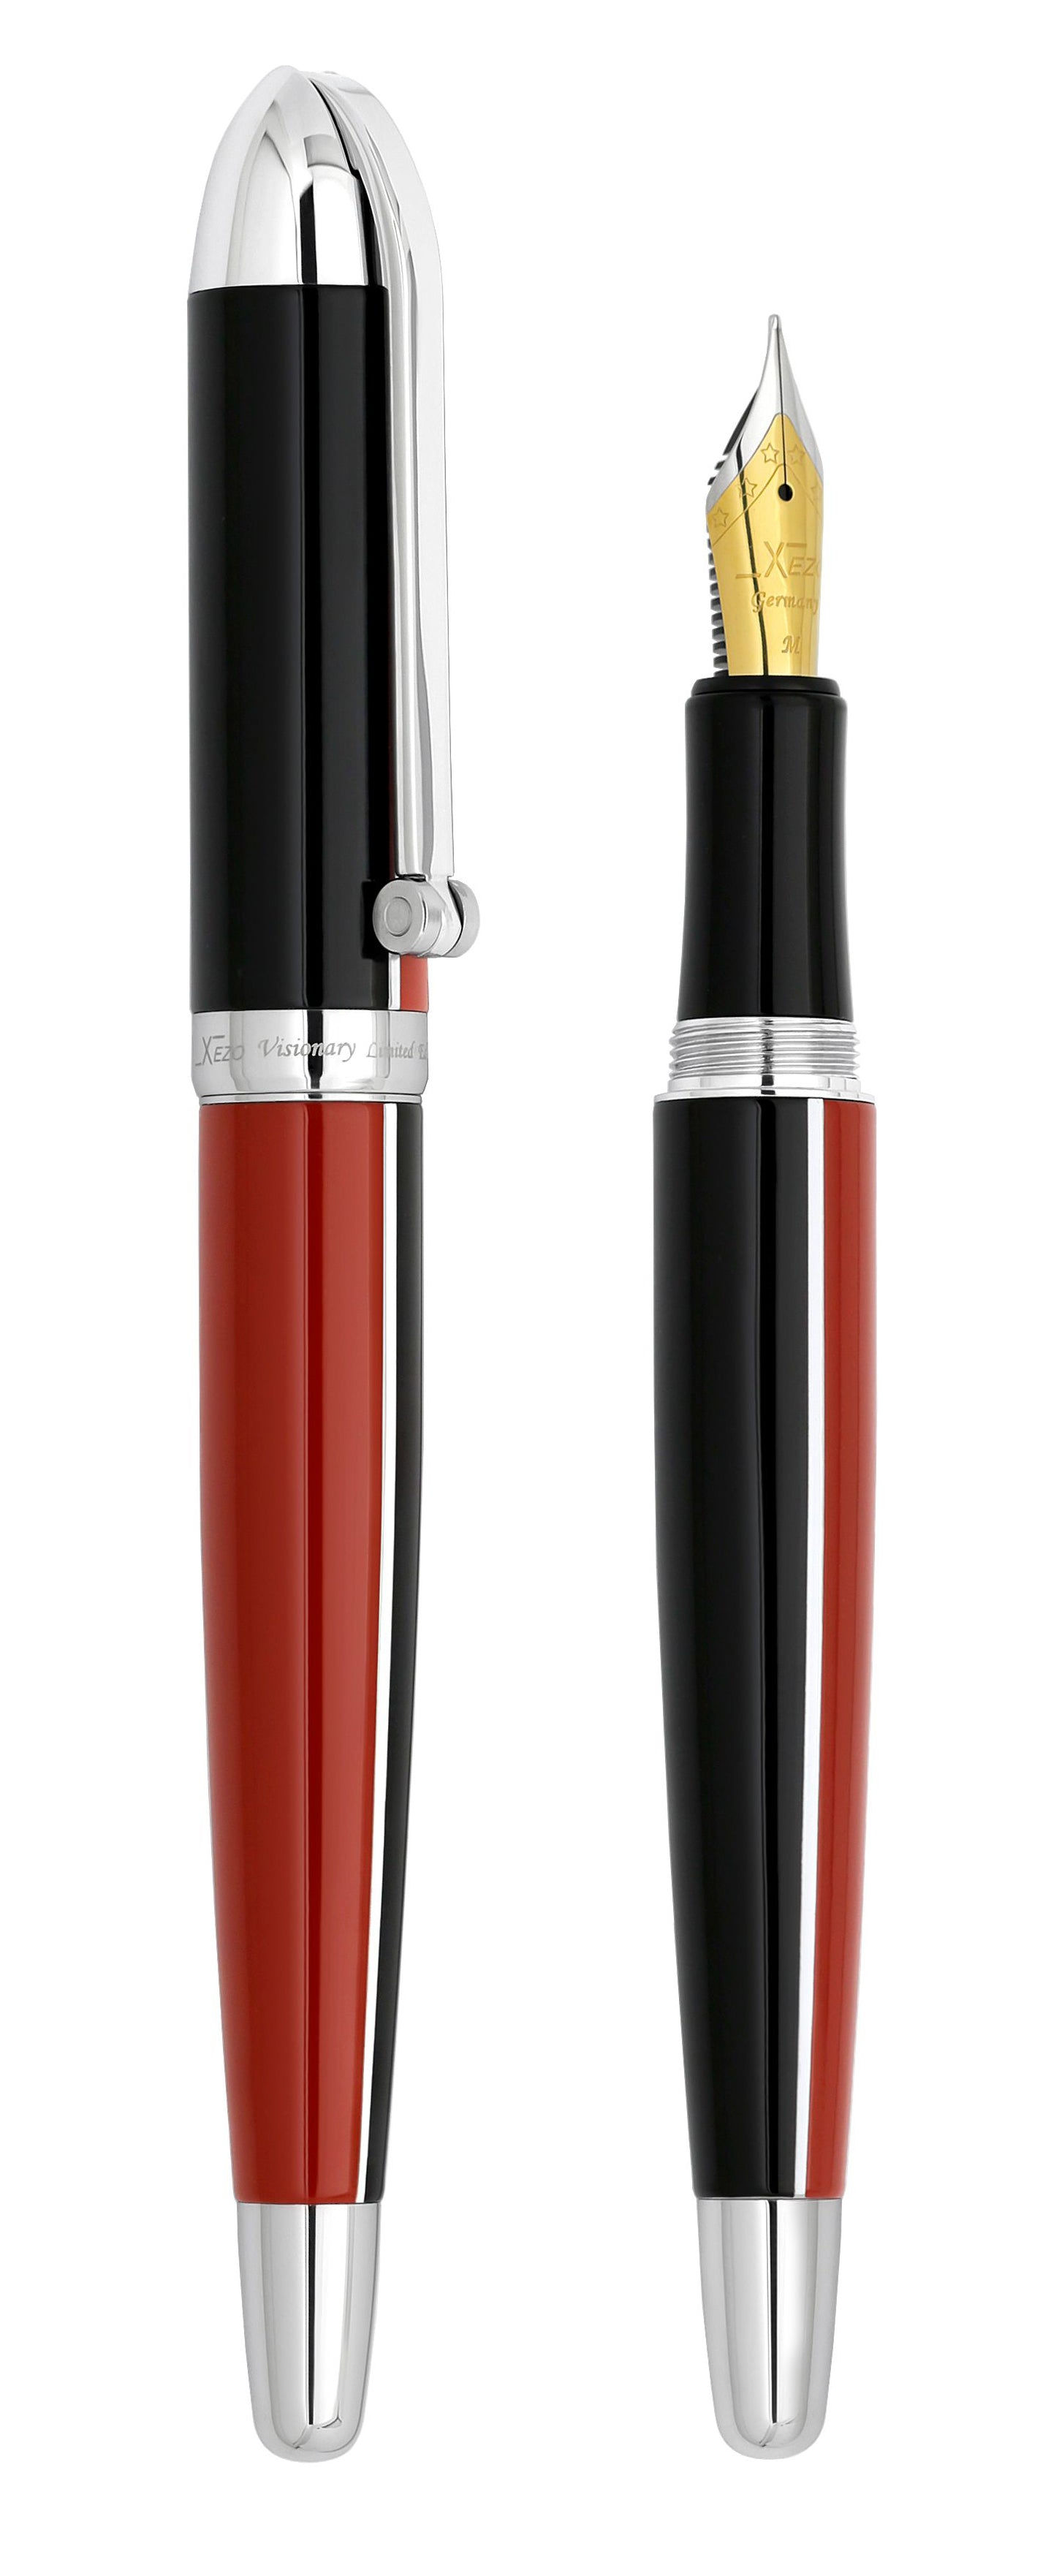 Xezo – Comparison between 3/4 view of capped and uncapped Visionary Red/Black FM fountain pens